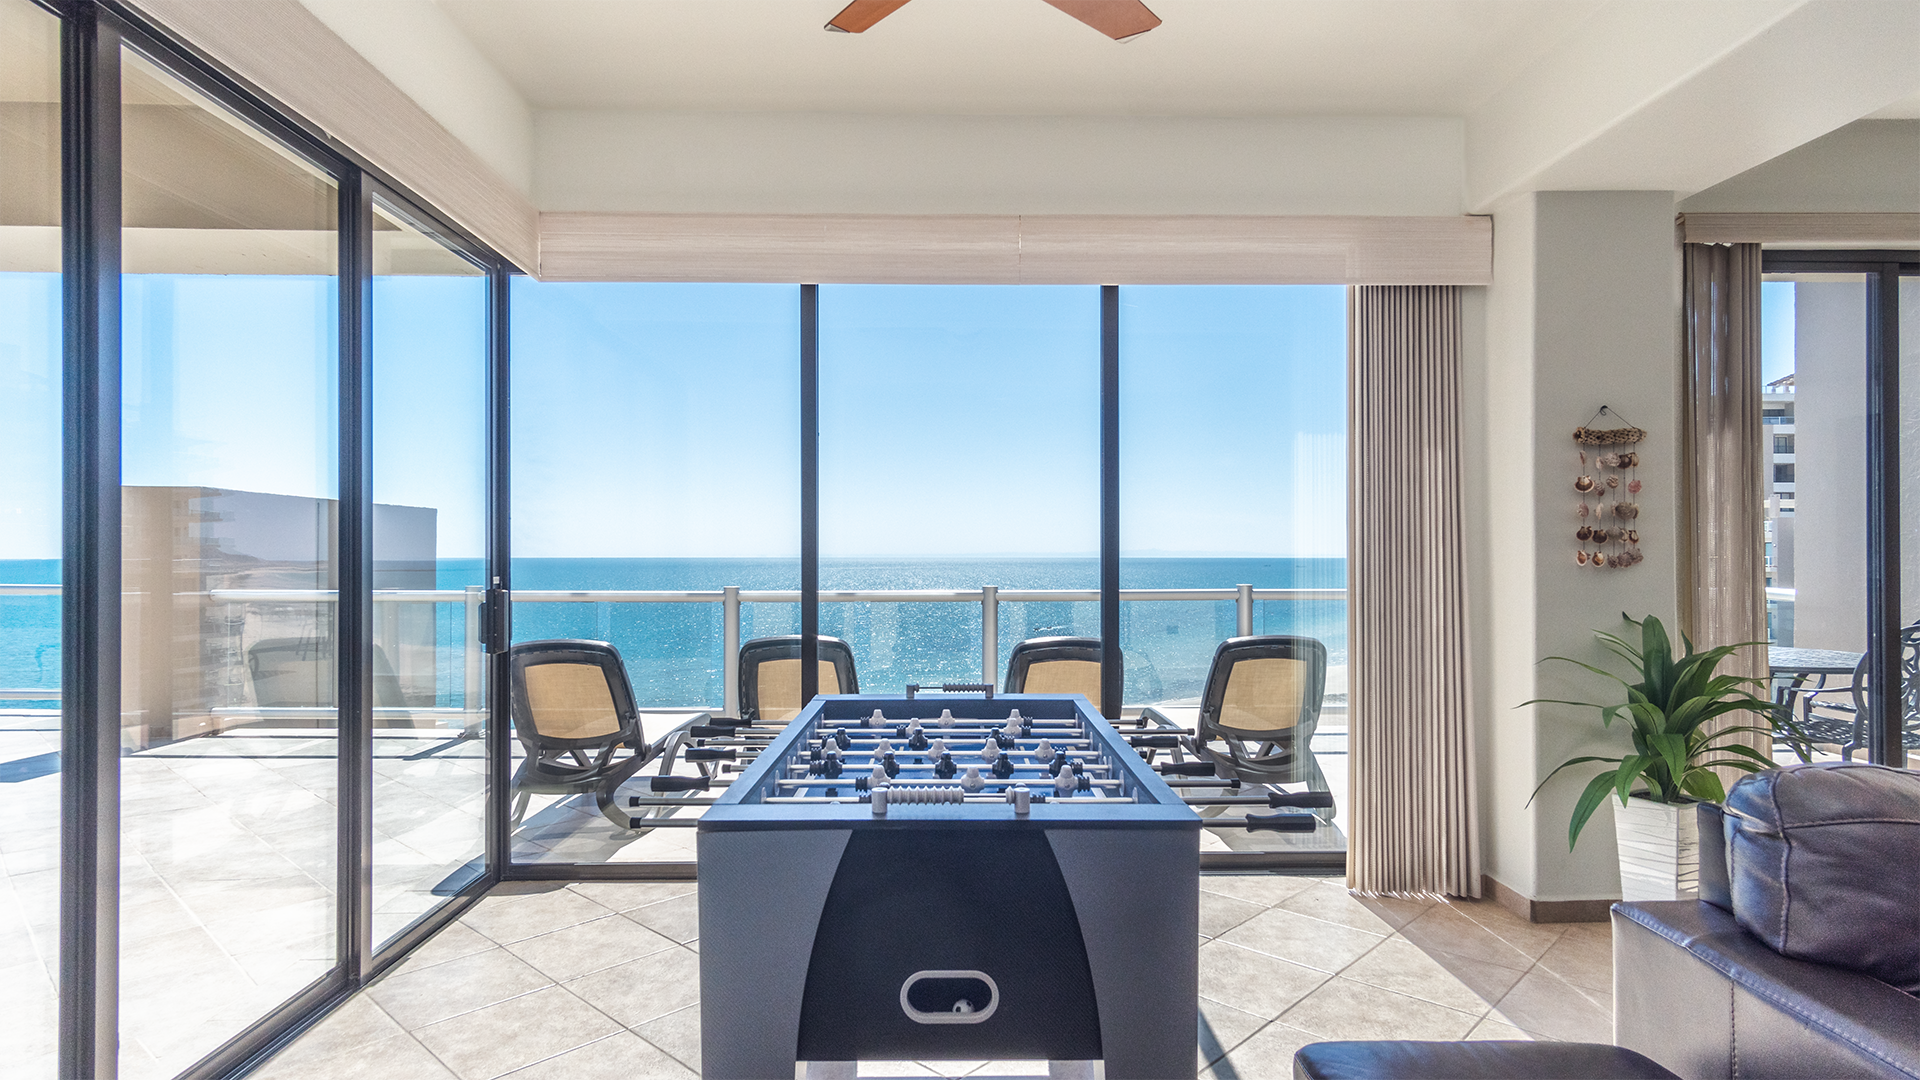 the foosball table with views